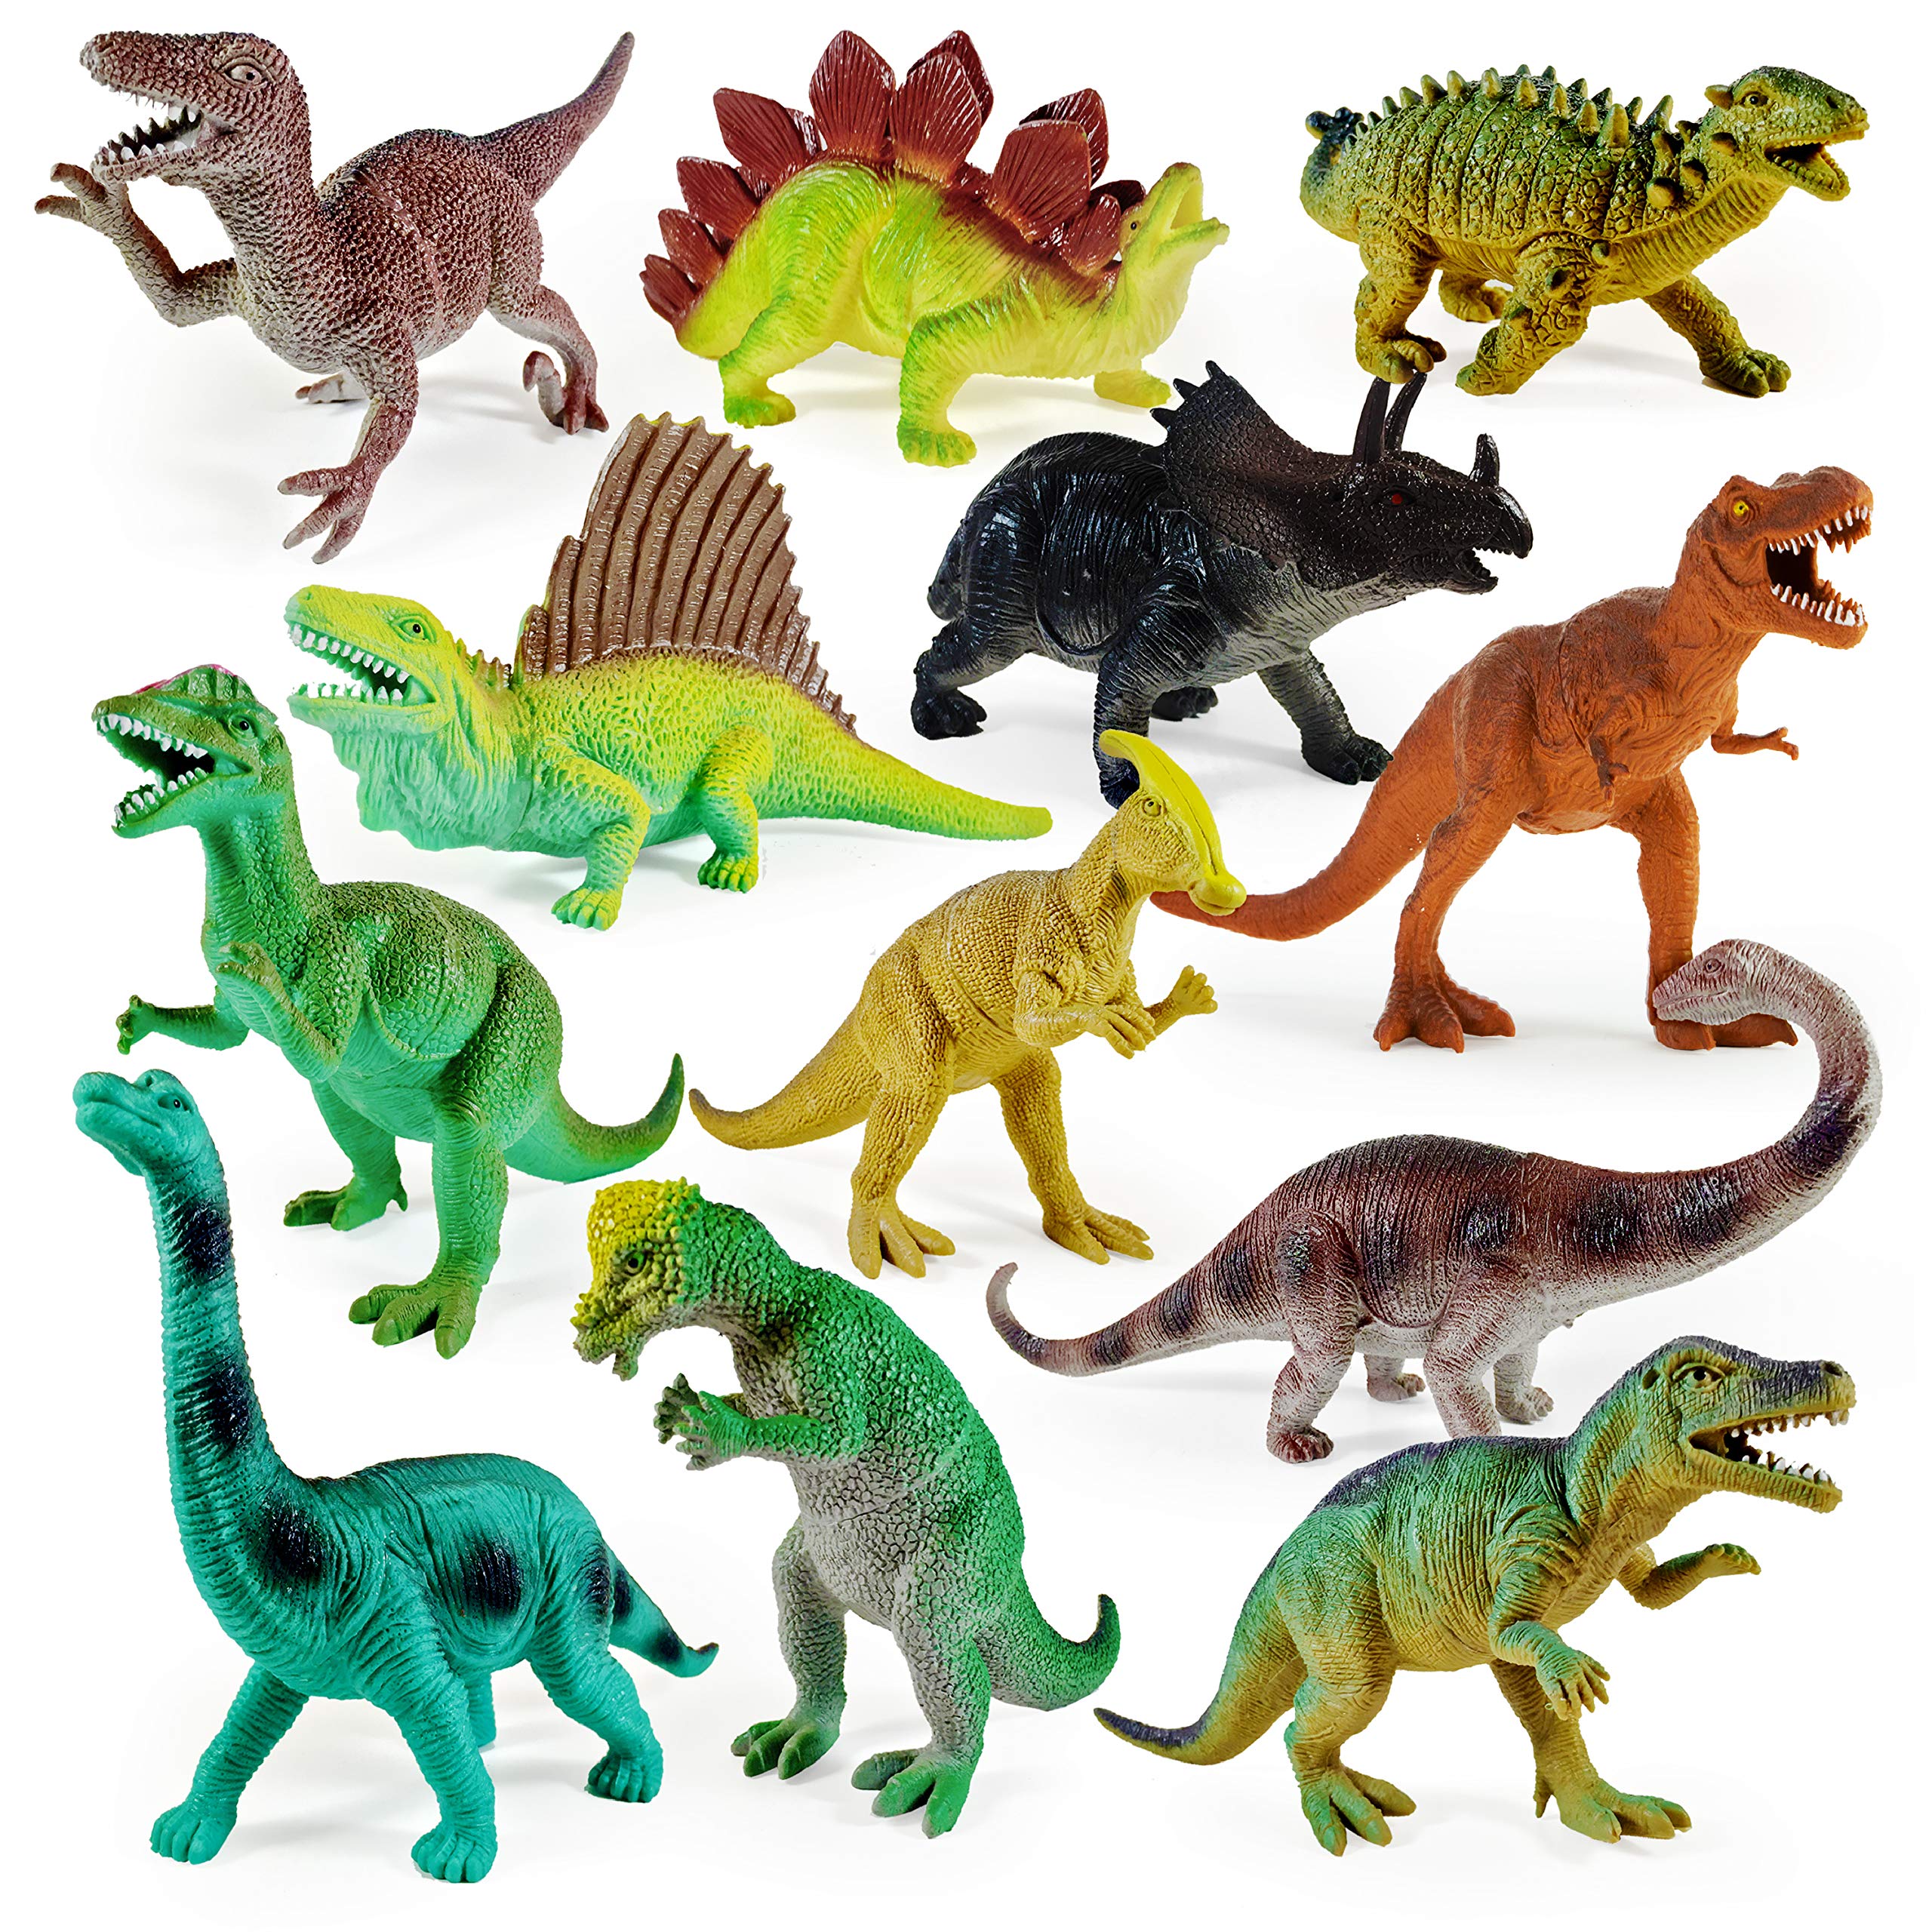 Book Cover Boley 12 Pack 9-Inch Educational Dinosaur Toys - Kids Realistic Toy Dinosaur Figures for Cool Kids and Toddler Education! (T-Rex, Triceratops, Velociraptor, and More!) Assorted